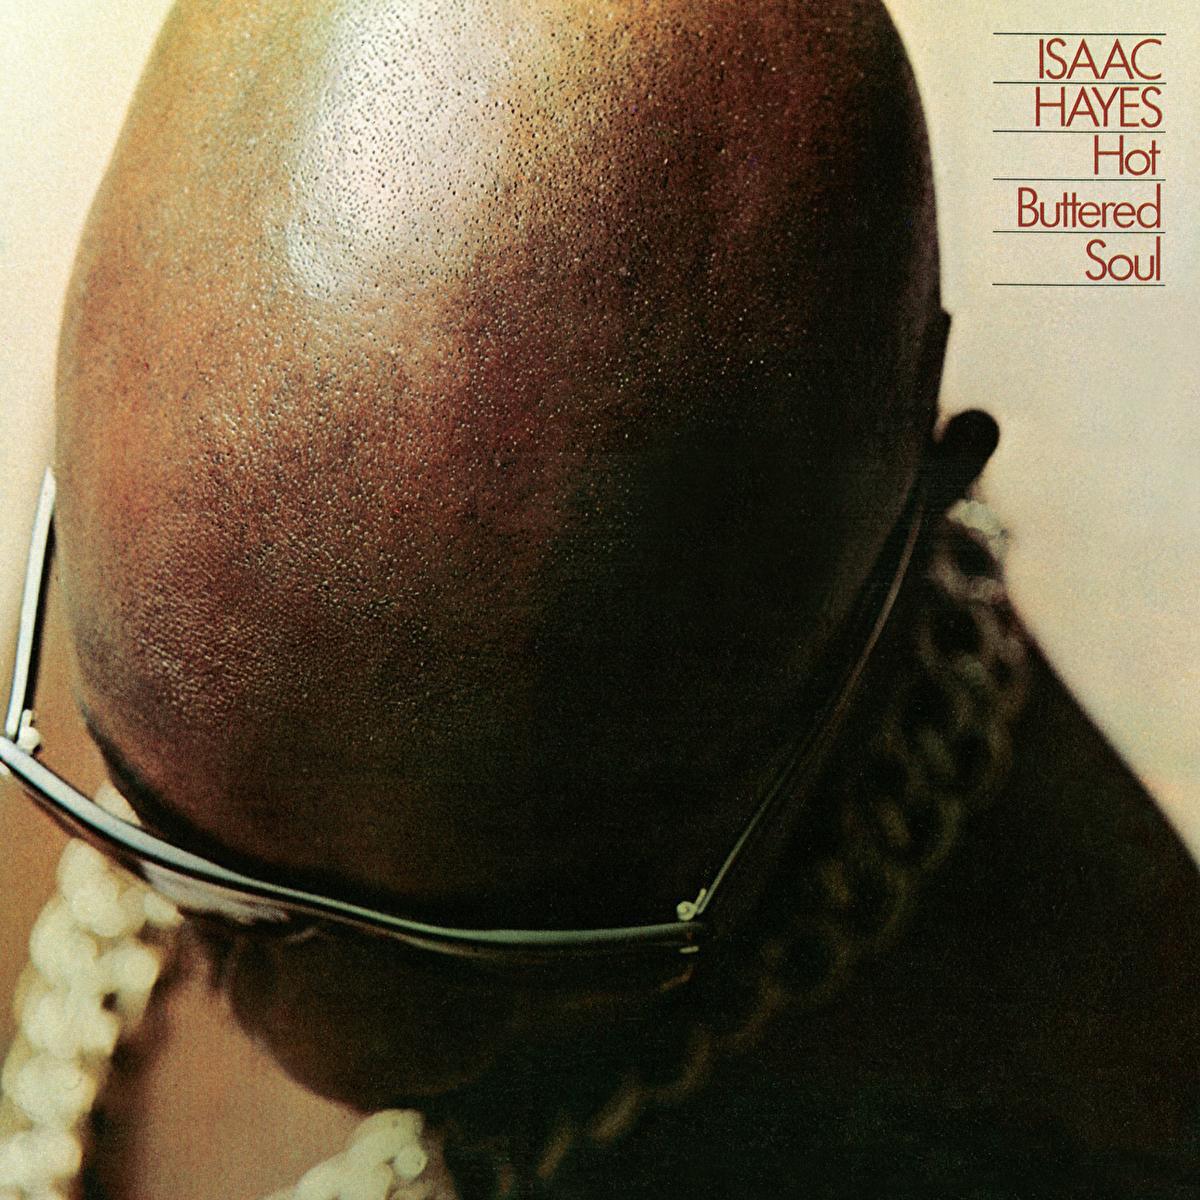 Isaac Hayes - By The Time I Get To Phoenix (Single Edit - Remaster)